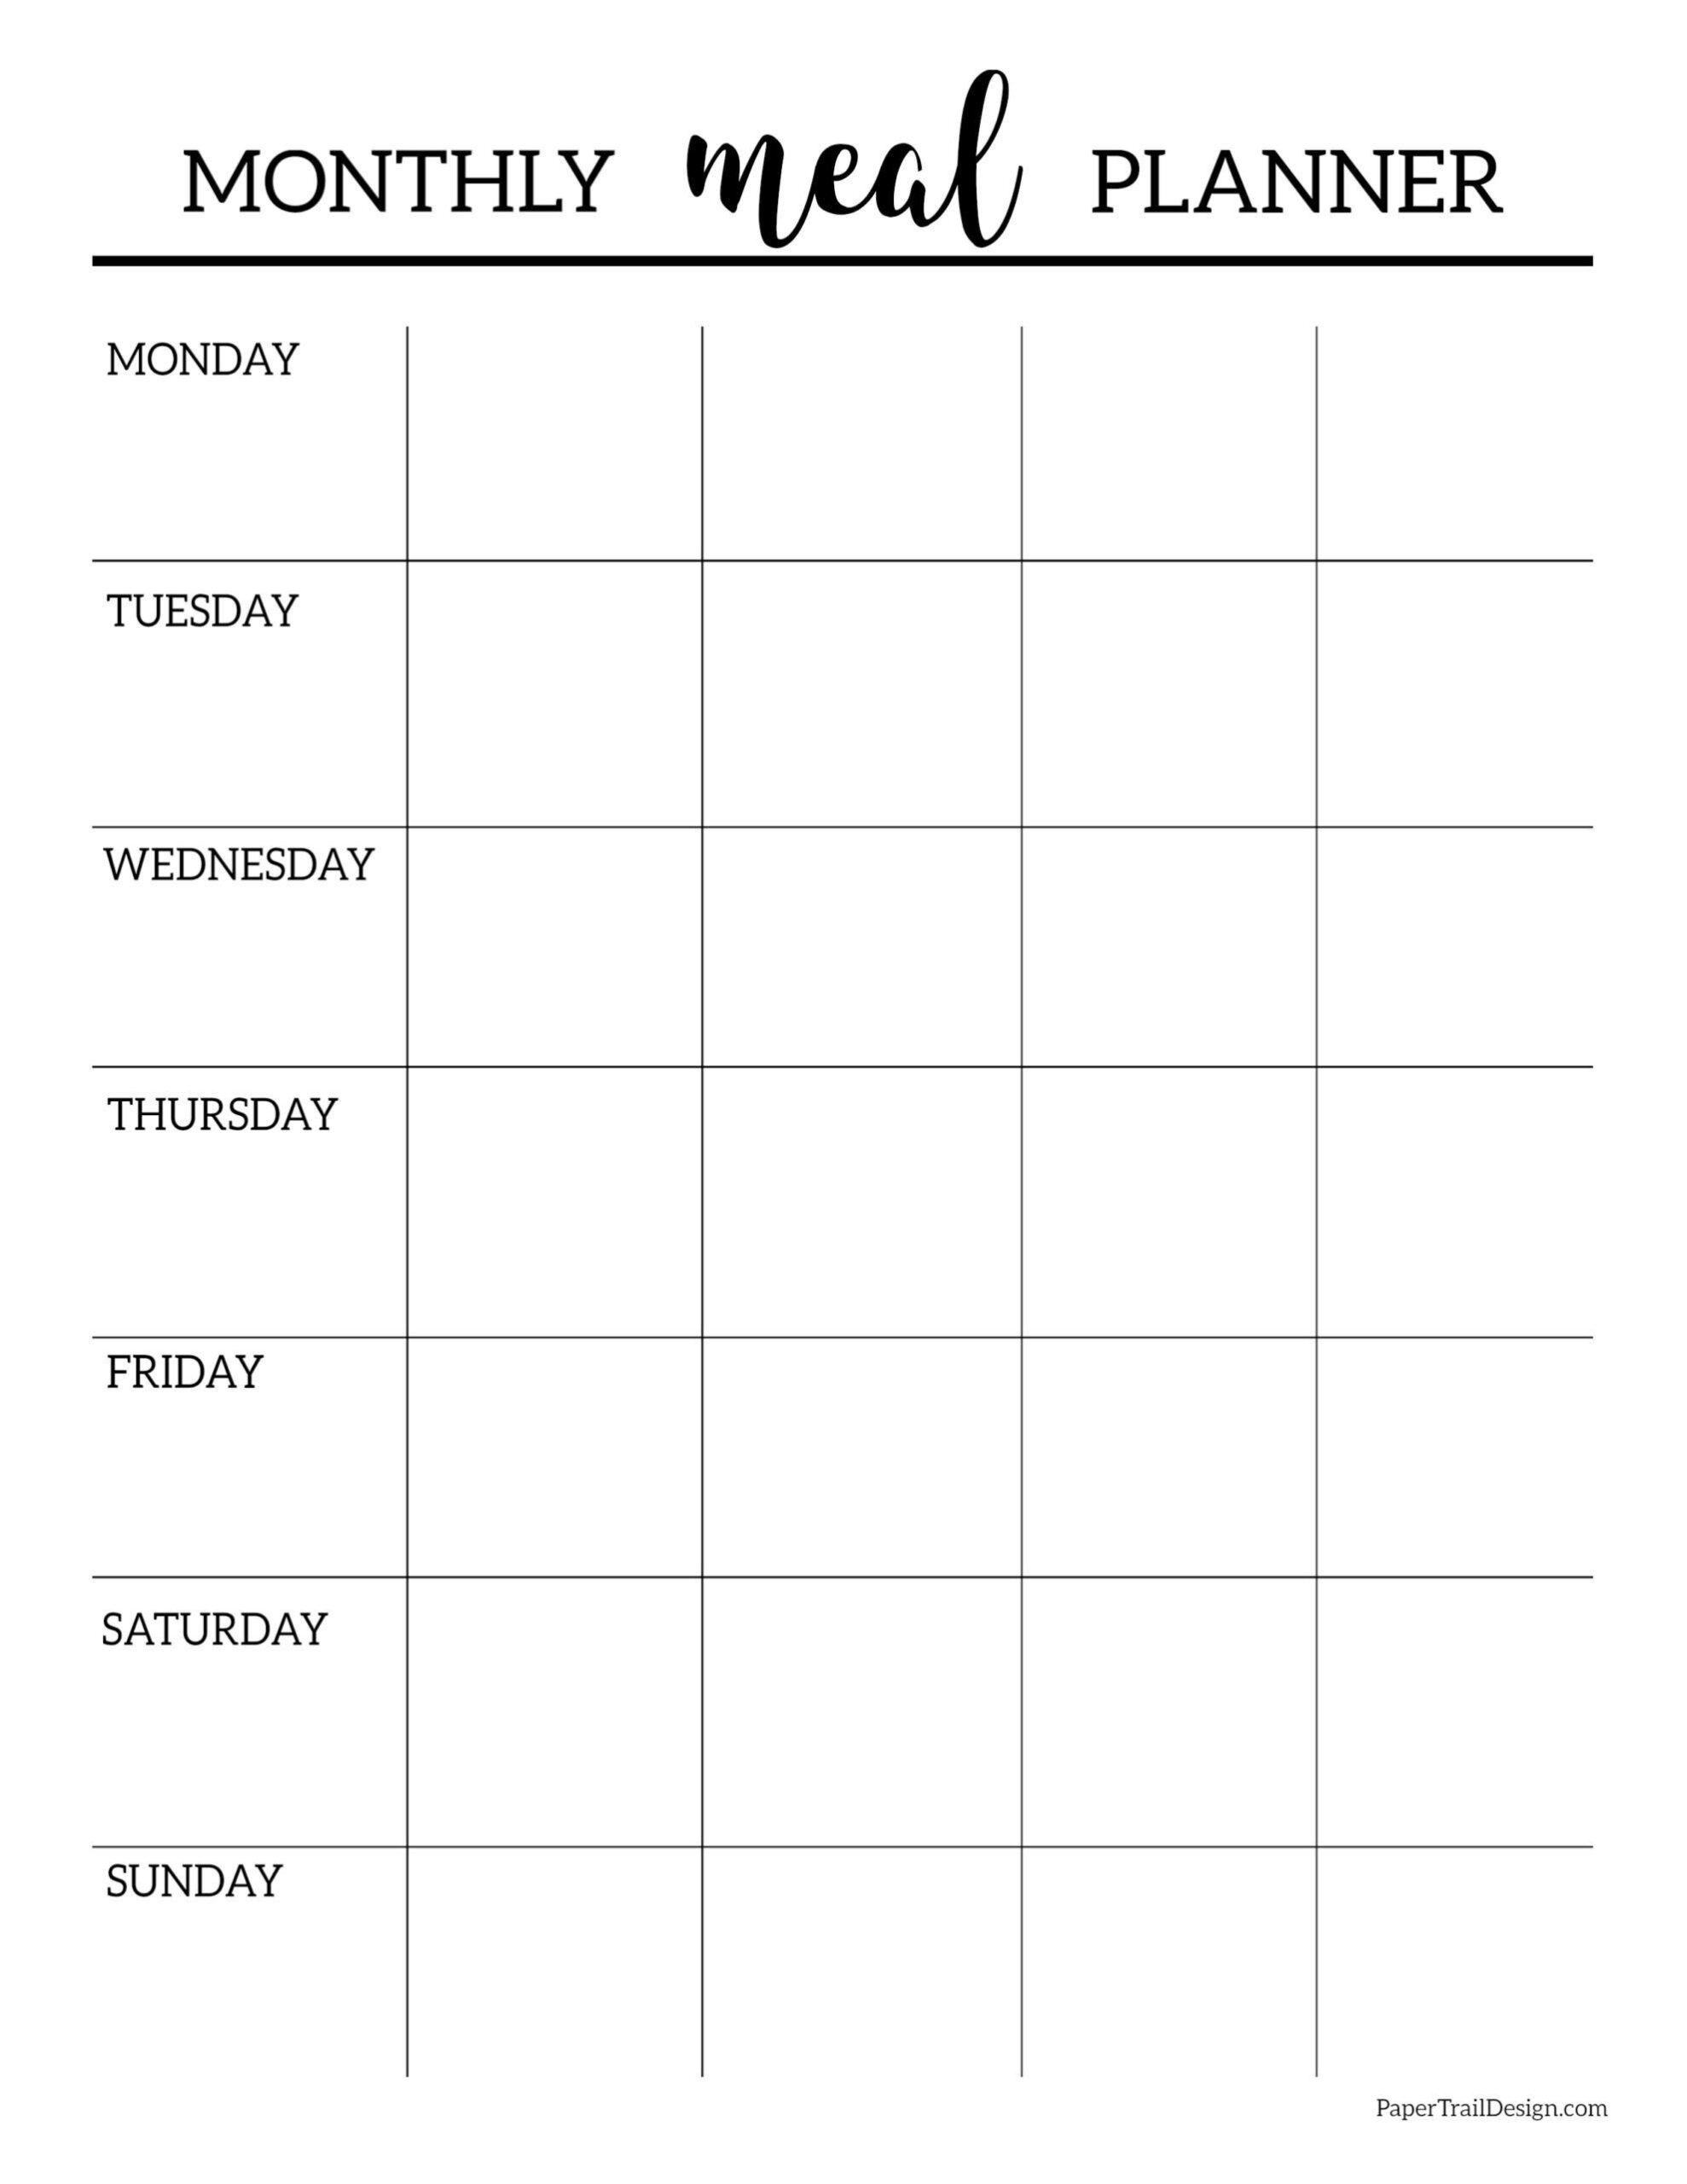 Free Printable Monthly Meal Planner Template | Paper Trail Design throughout Free Printable Monthly Meal Planner